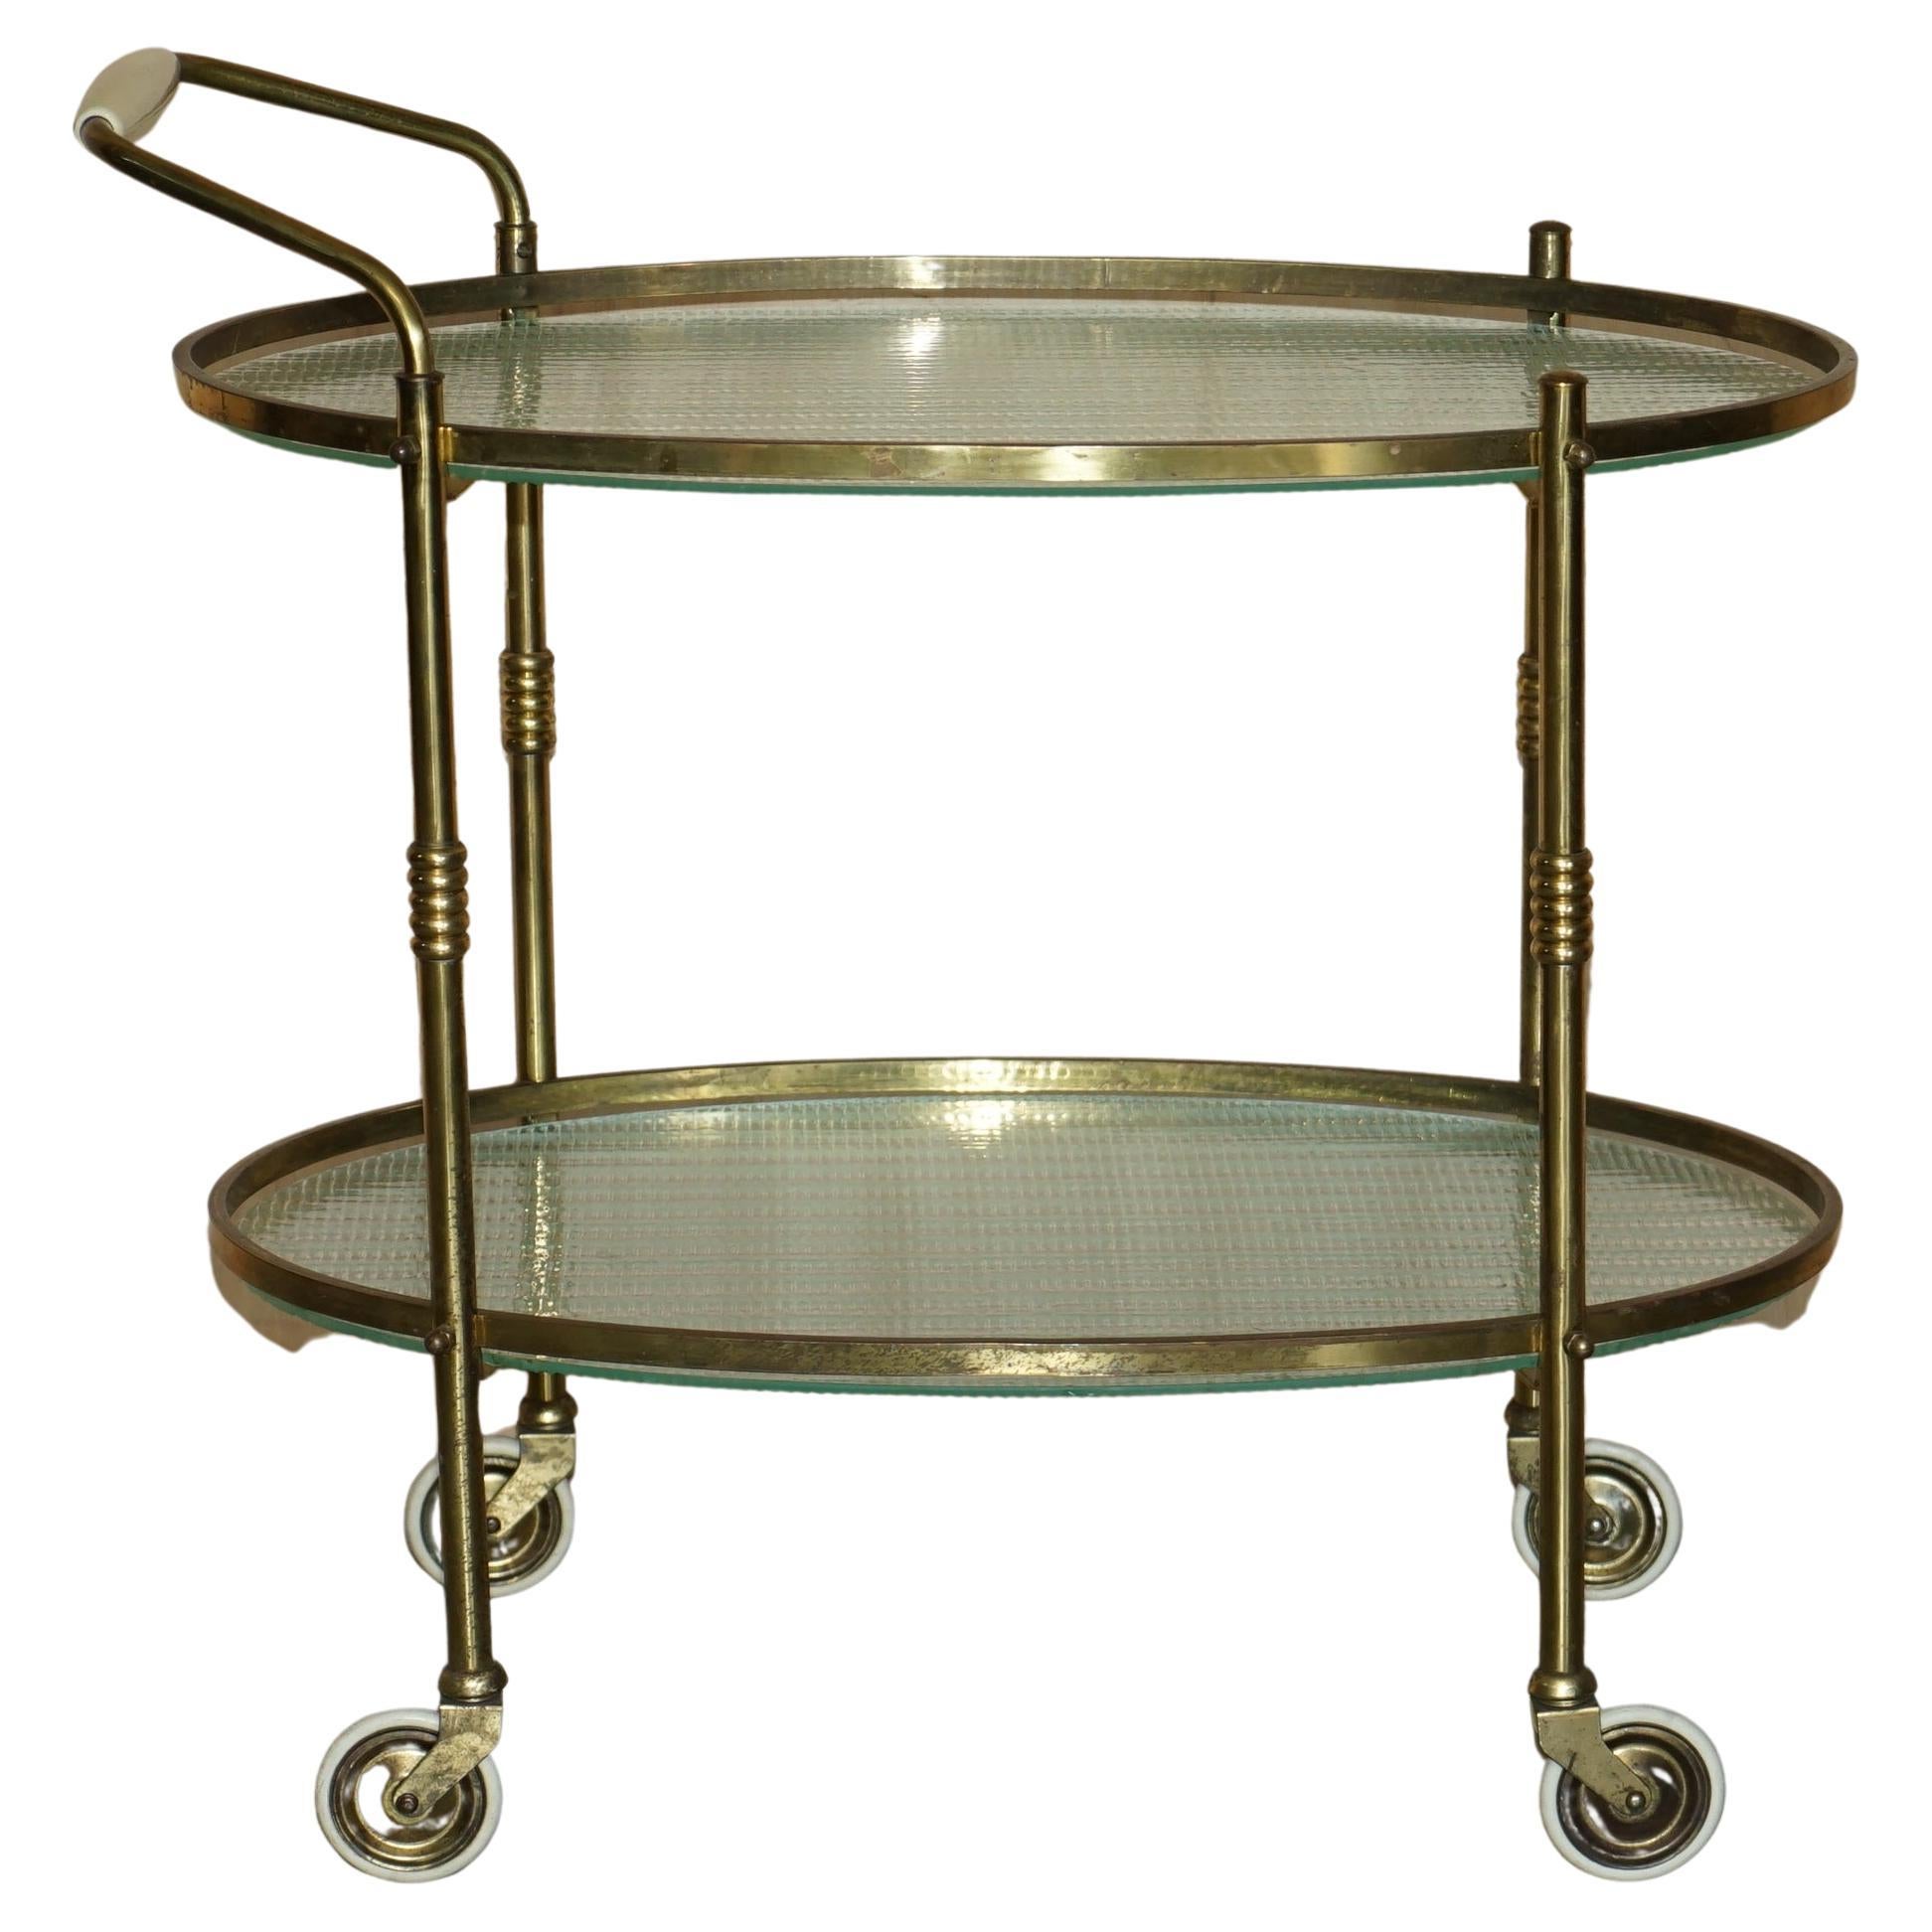 Antique Art Deco circa 1920 Frosted Glass & Polished Brass circa Drinks Trolley For Sale